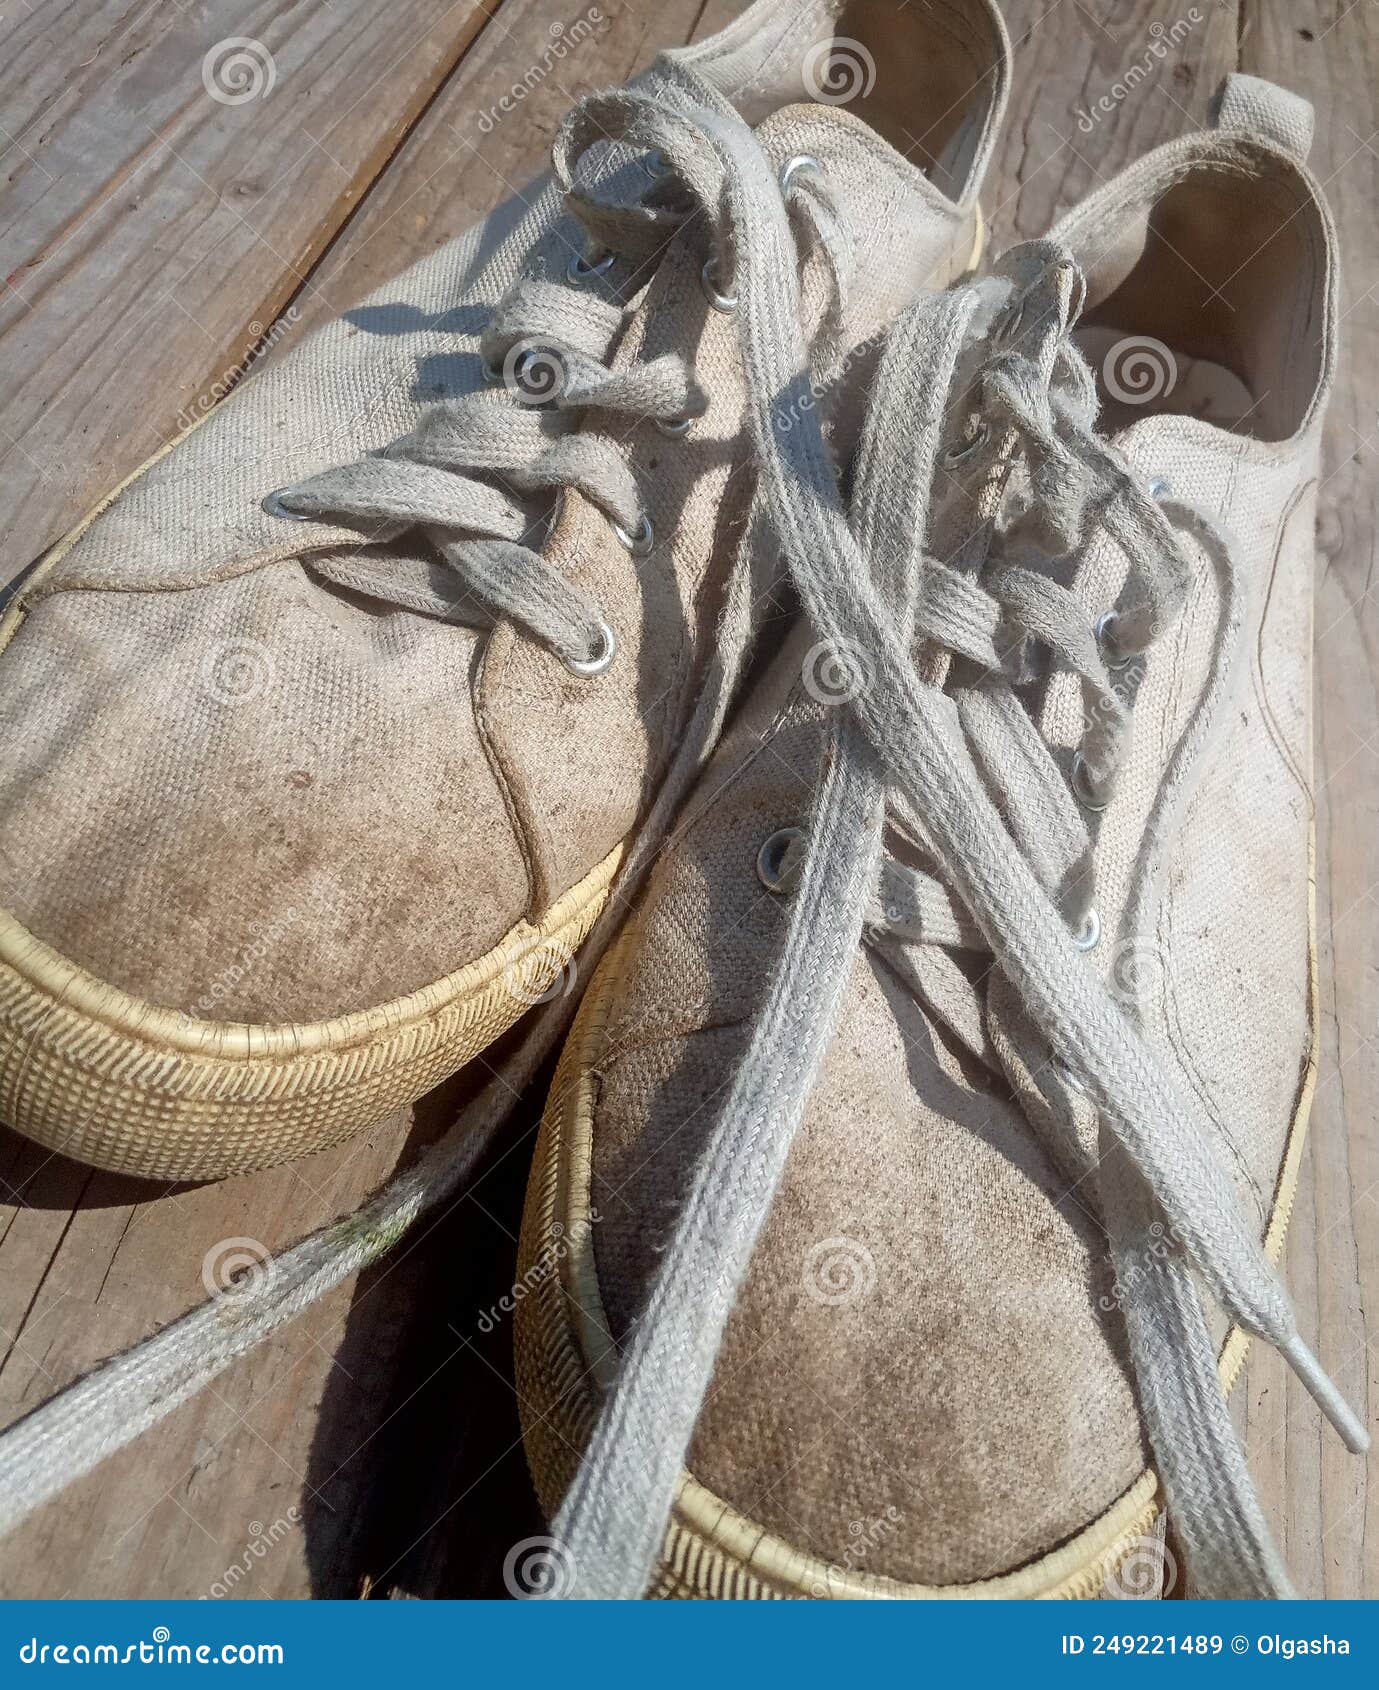 Old Worn Out and Dirty White Sneakers Stock Image - Image of footwear ...